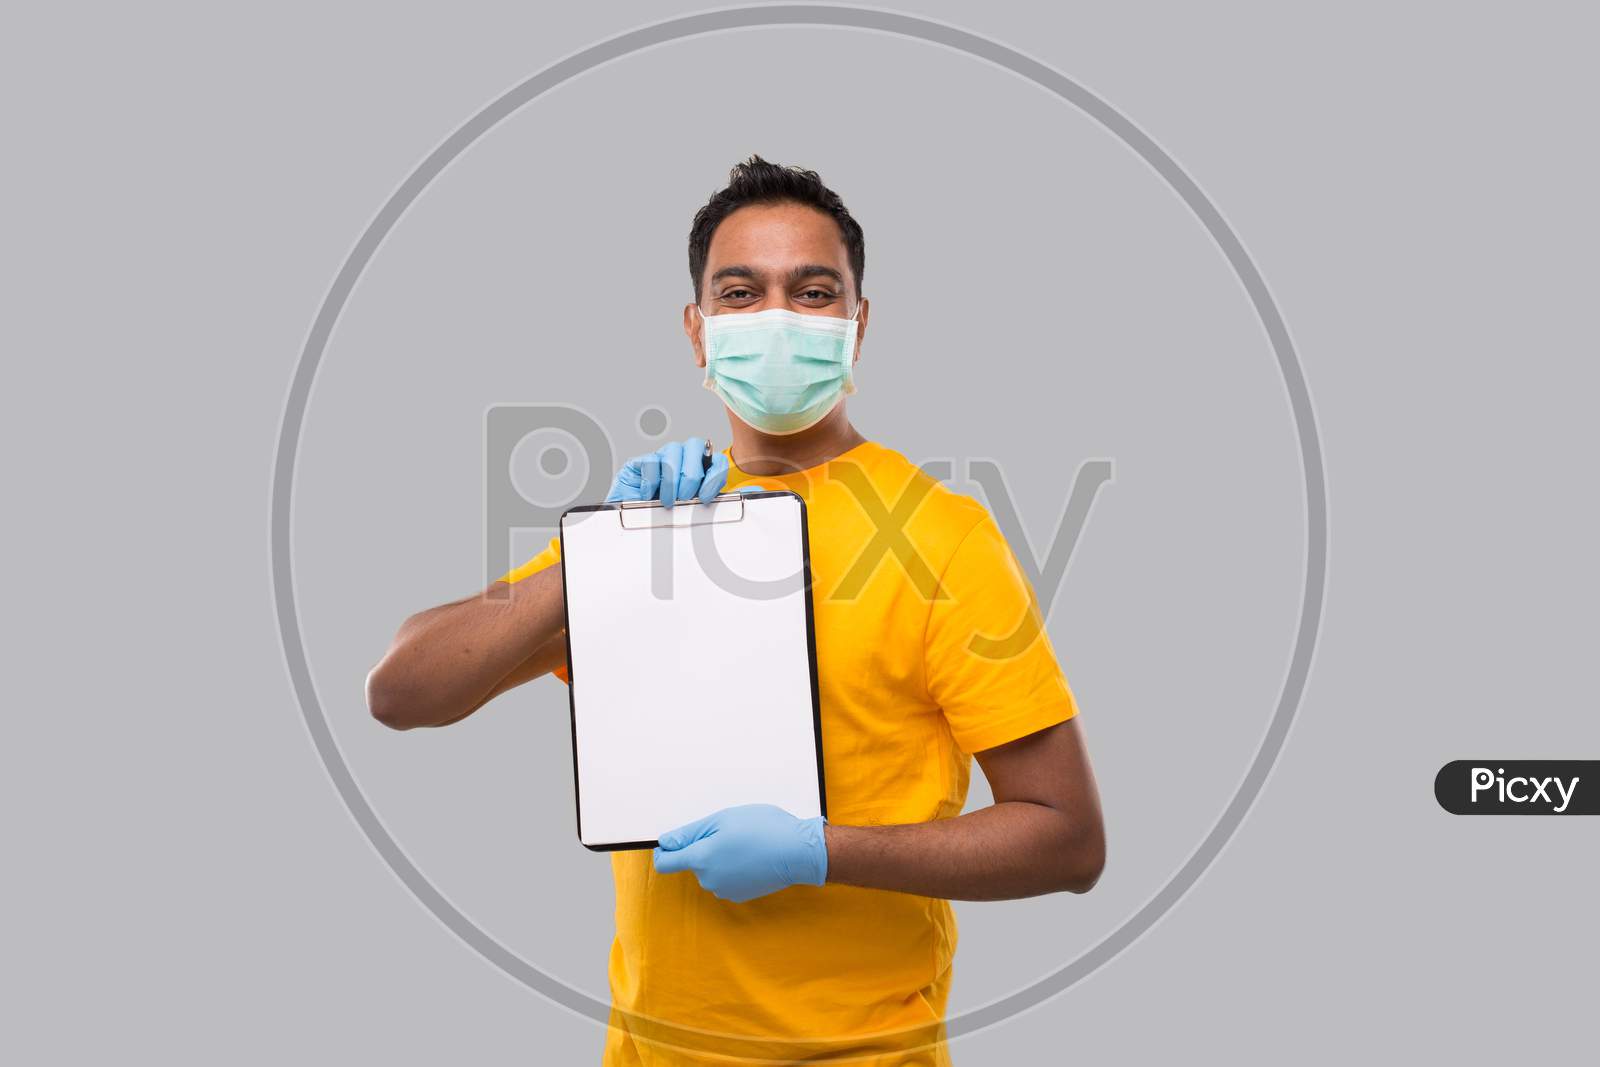 Indian Man Holding Clipboard Wearing Medical Mask And Gloves Watching In Camera. Indian Delivery Boy Clipboard